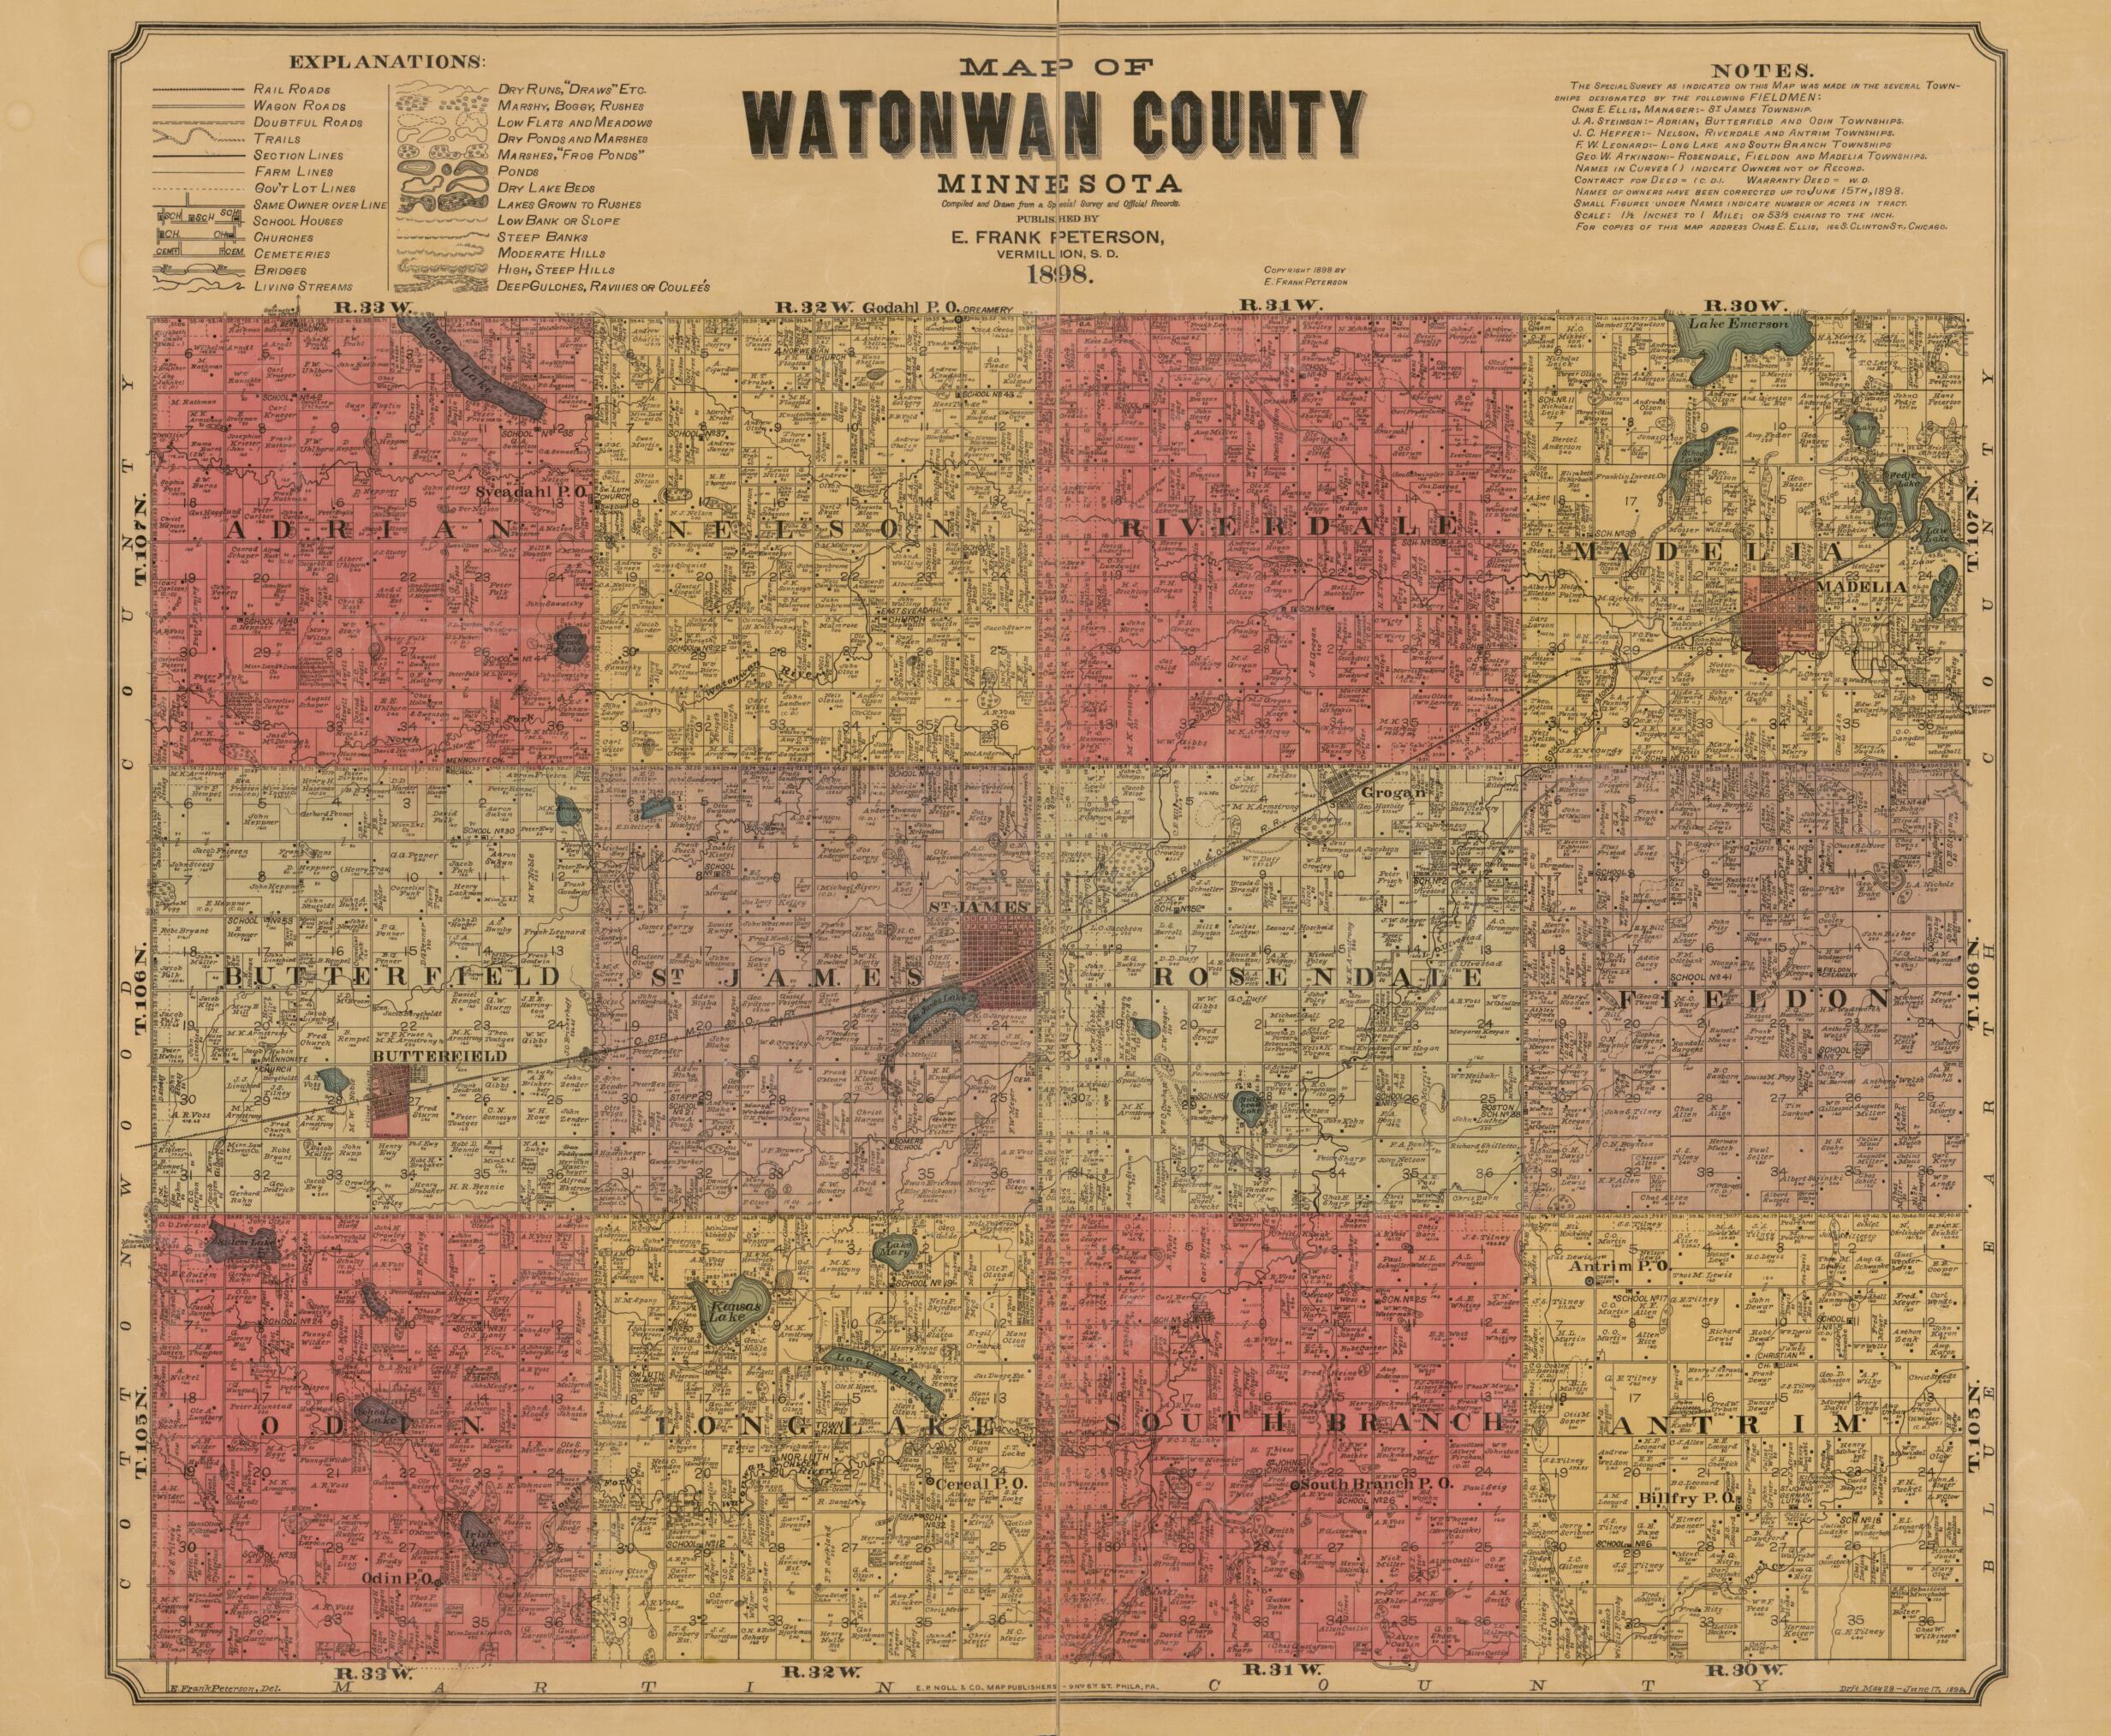 This old map of Map of Watonwan County, Minnesota : Compiled and Drawn from a Special Survey and Official Records from 1898 was created by  E.P. Noll &amp; Co, E. Frank Peterson in 1898